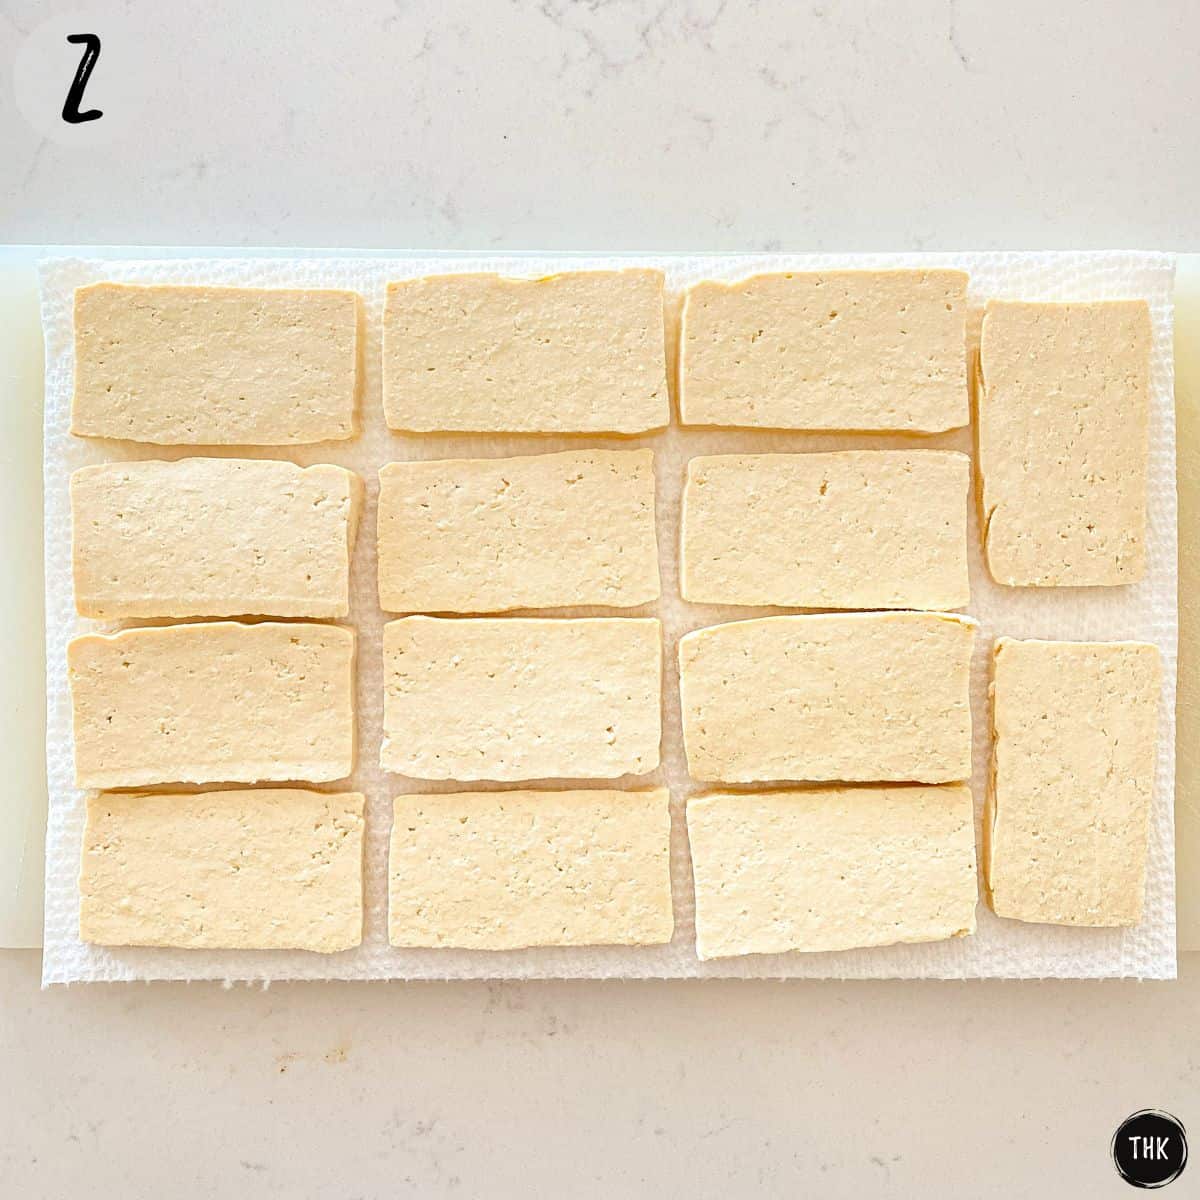 Tofu slices arranged in single layer on paper towel and cutting board.